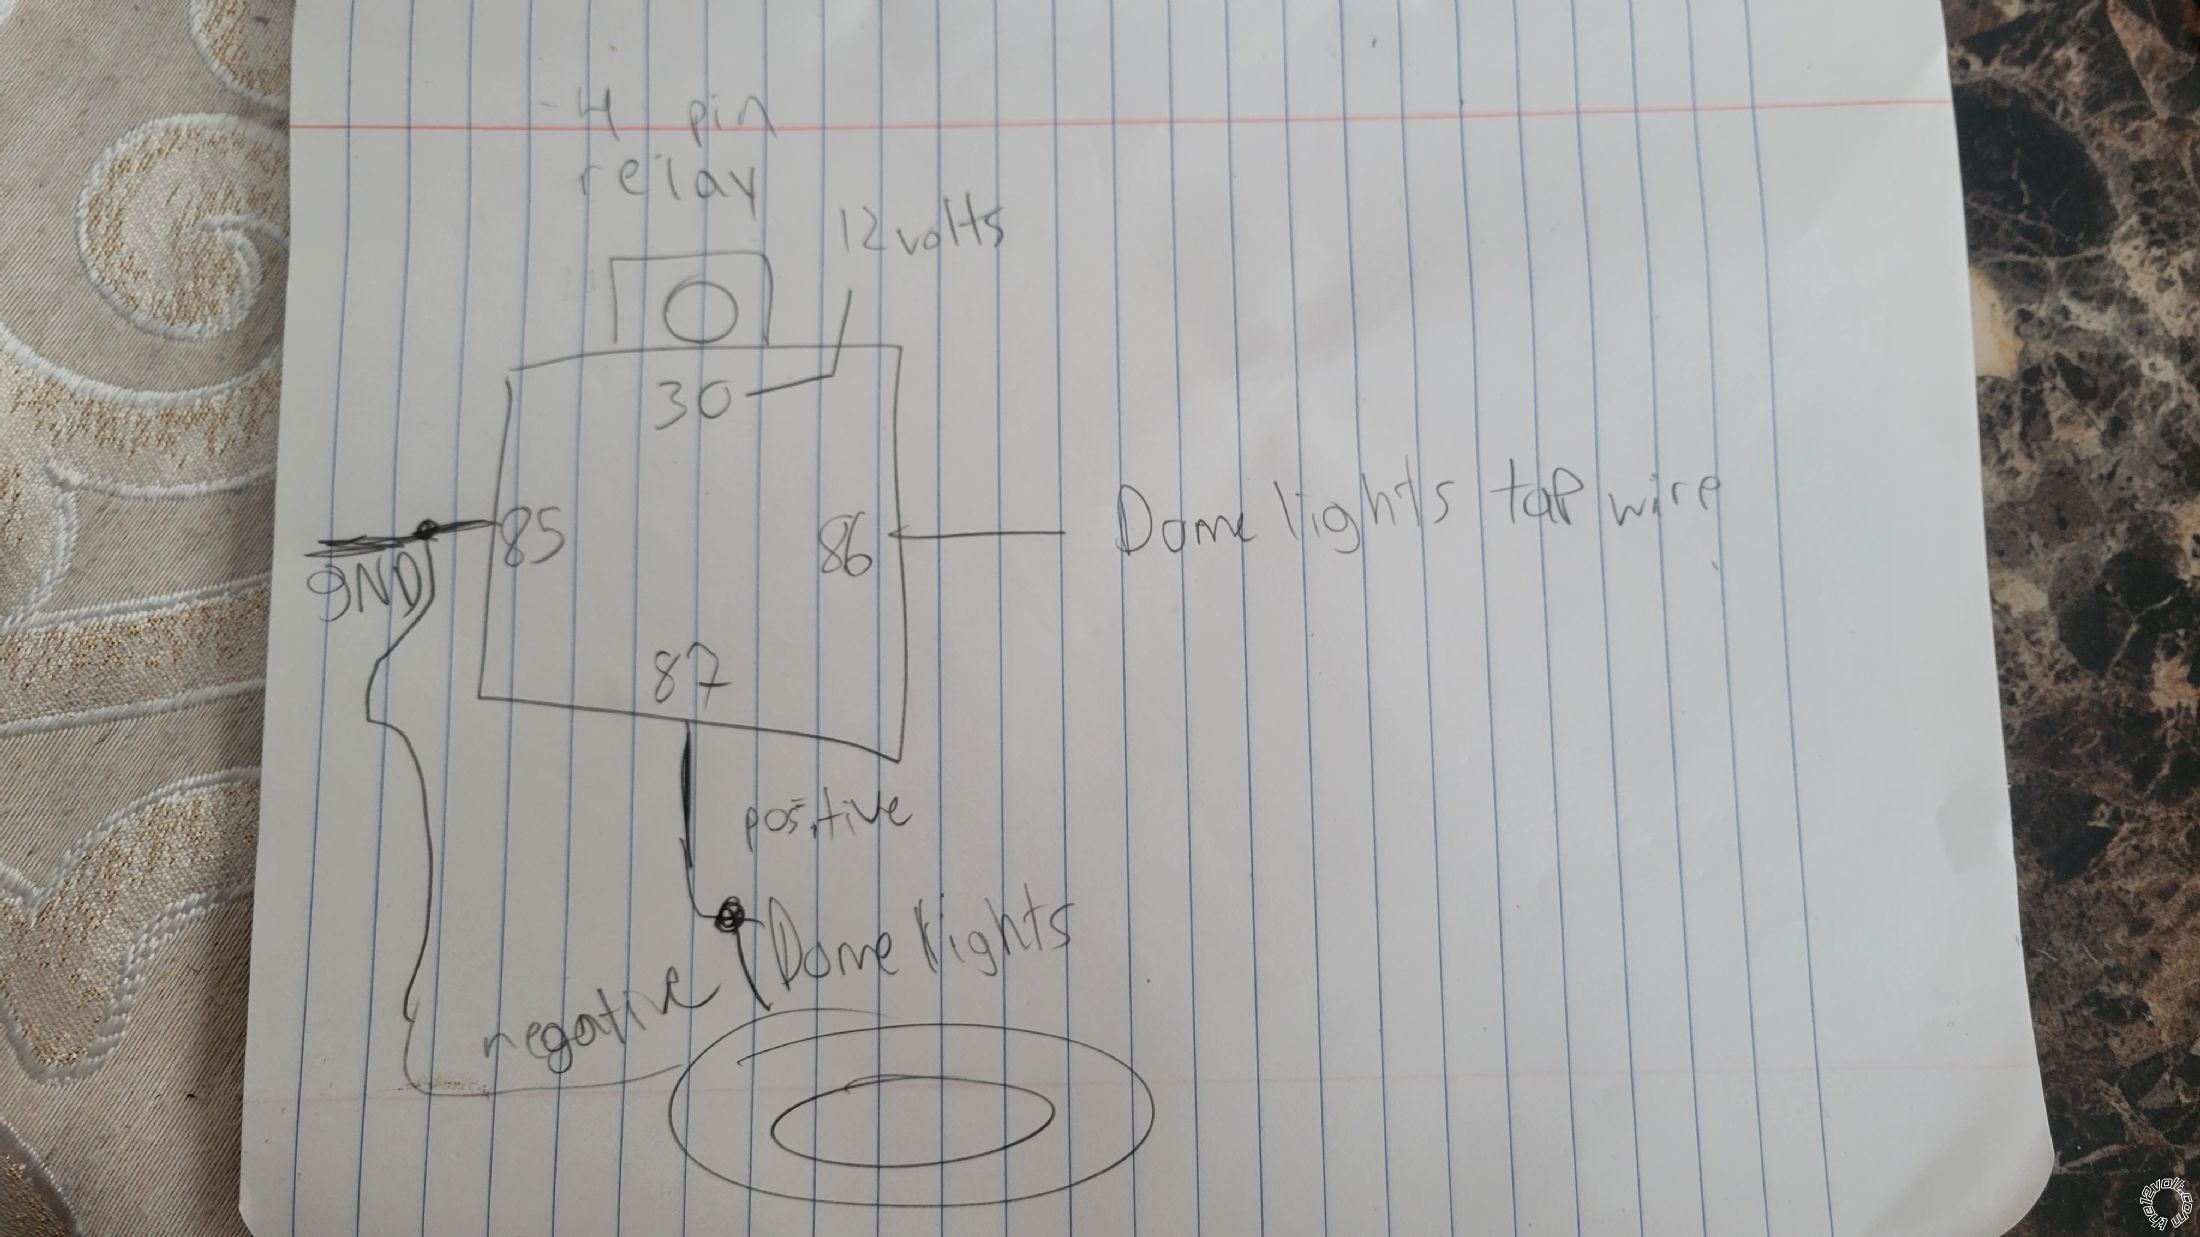 Rock Lights To Dome Lights Using Relay, Relay Buzzes While Dimming - Last Post -- posted image.